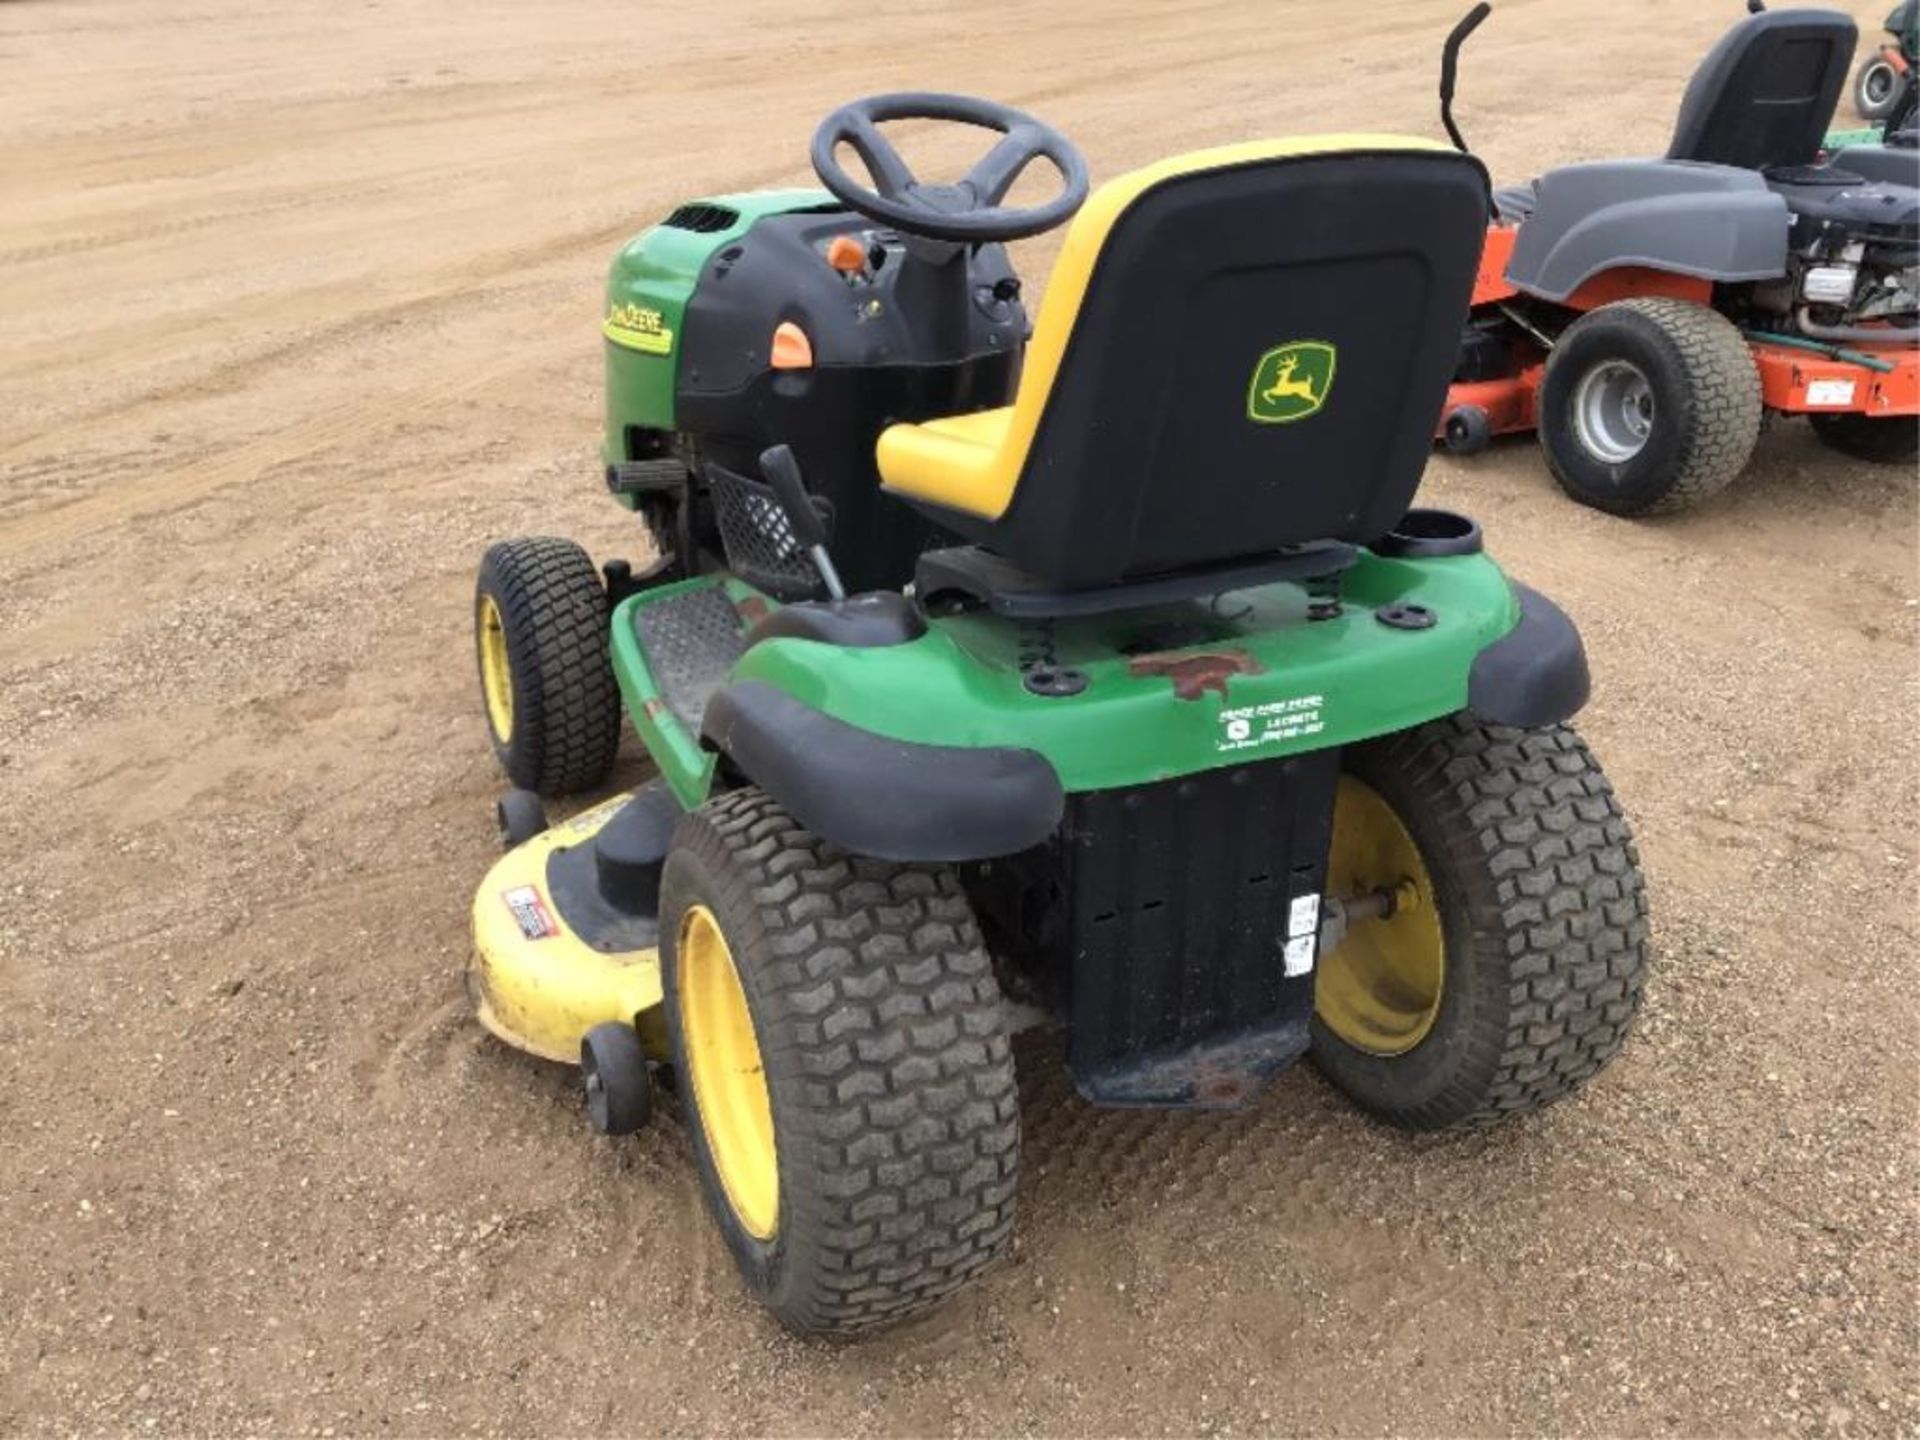 John Deere L120 Riding Lawn Mower Automatic, 48in Cut, 22hp Eng - Image 5 of 7